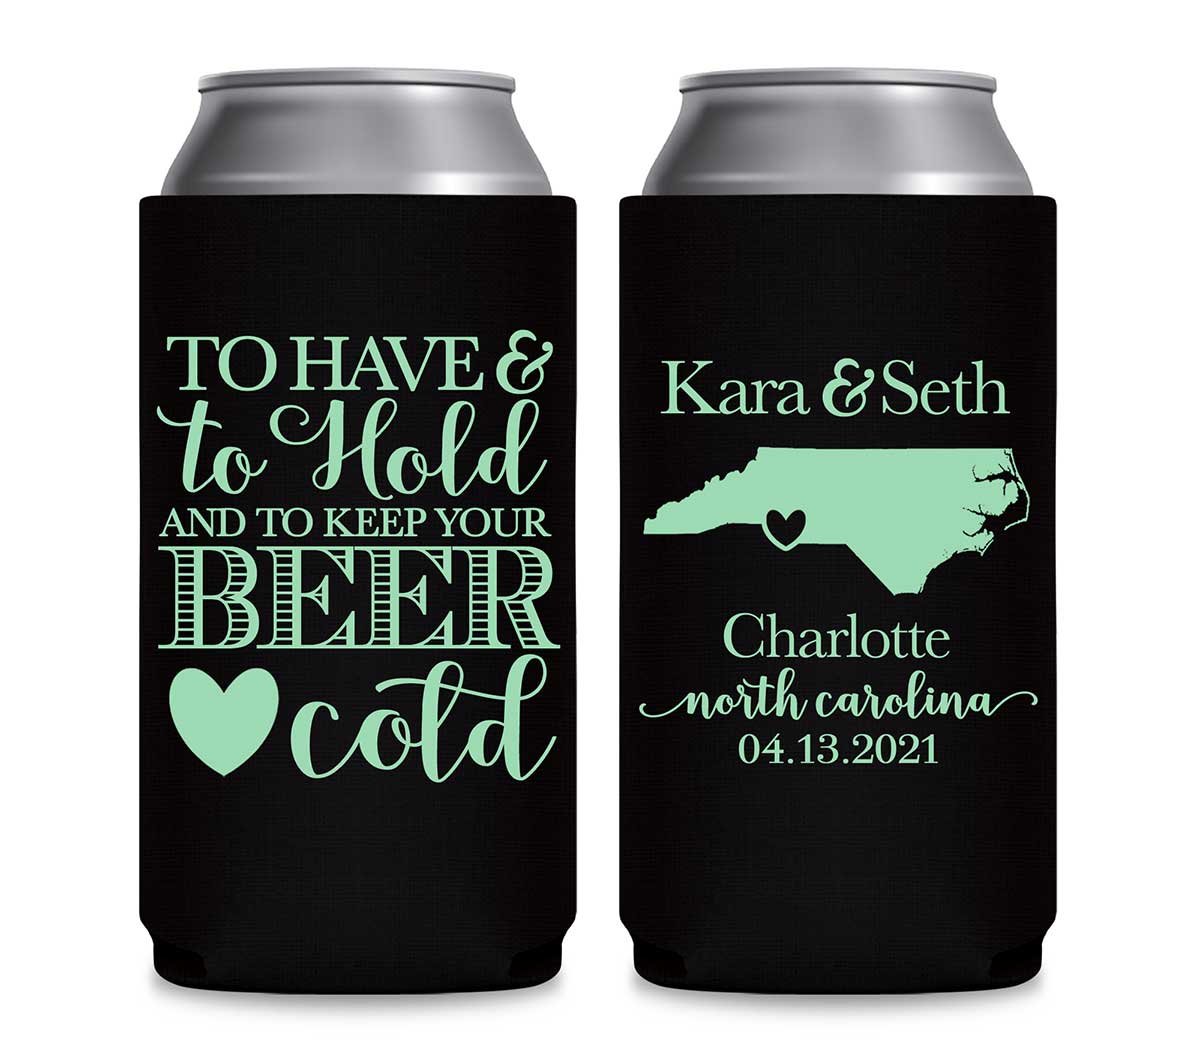 https://www.thatweddingshop.com/wp-content/uploads/2019/12/To-Have-And-To-Hold-Keep-Your-Beer-Cold-1B-Collapsible-Foam-12oz-Slim-Can-Koozies-Personalized-Wedding-Favors-With-Map.jpg